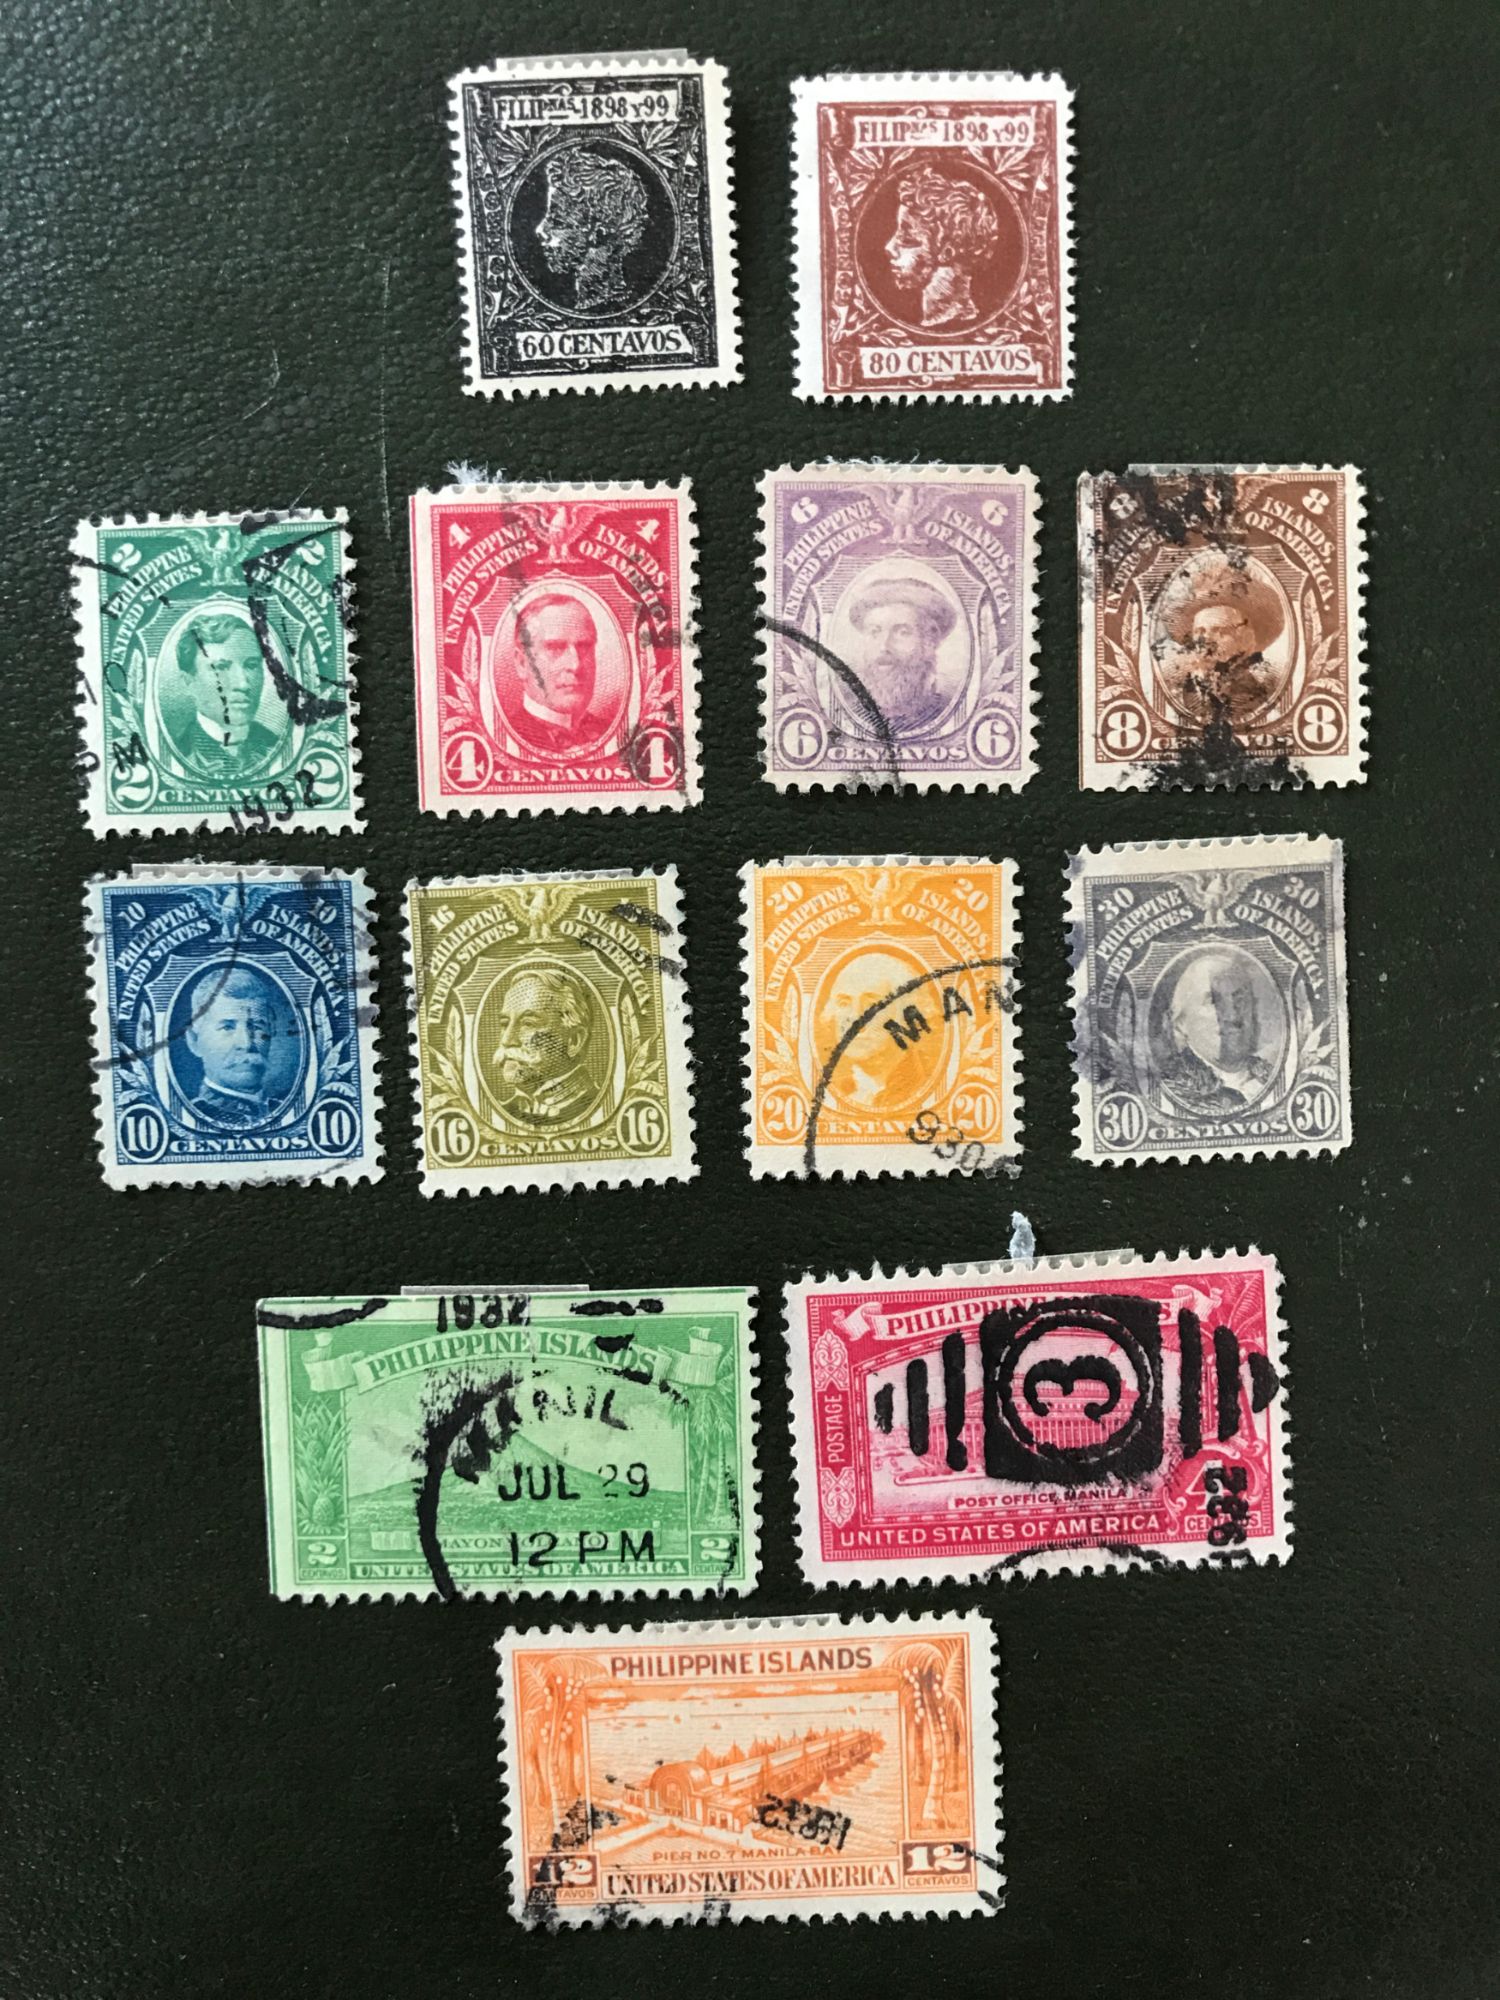 Timbres Philippines 13 Timbres De 1898 À 1932 Yvert 172,173, 204, 205, 206, 207, 208, 212, 214, 219, 234, 235